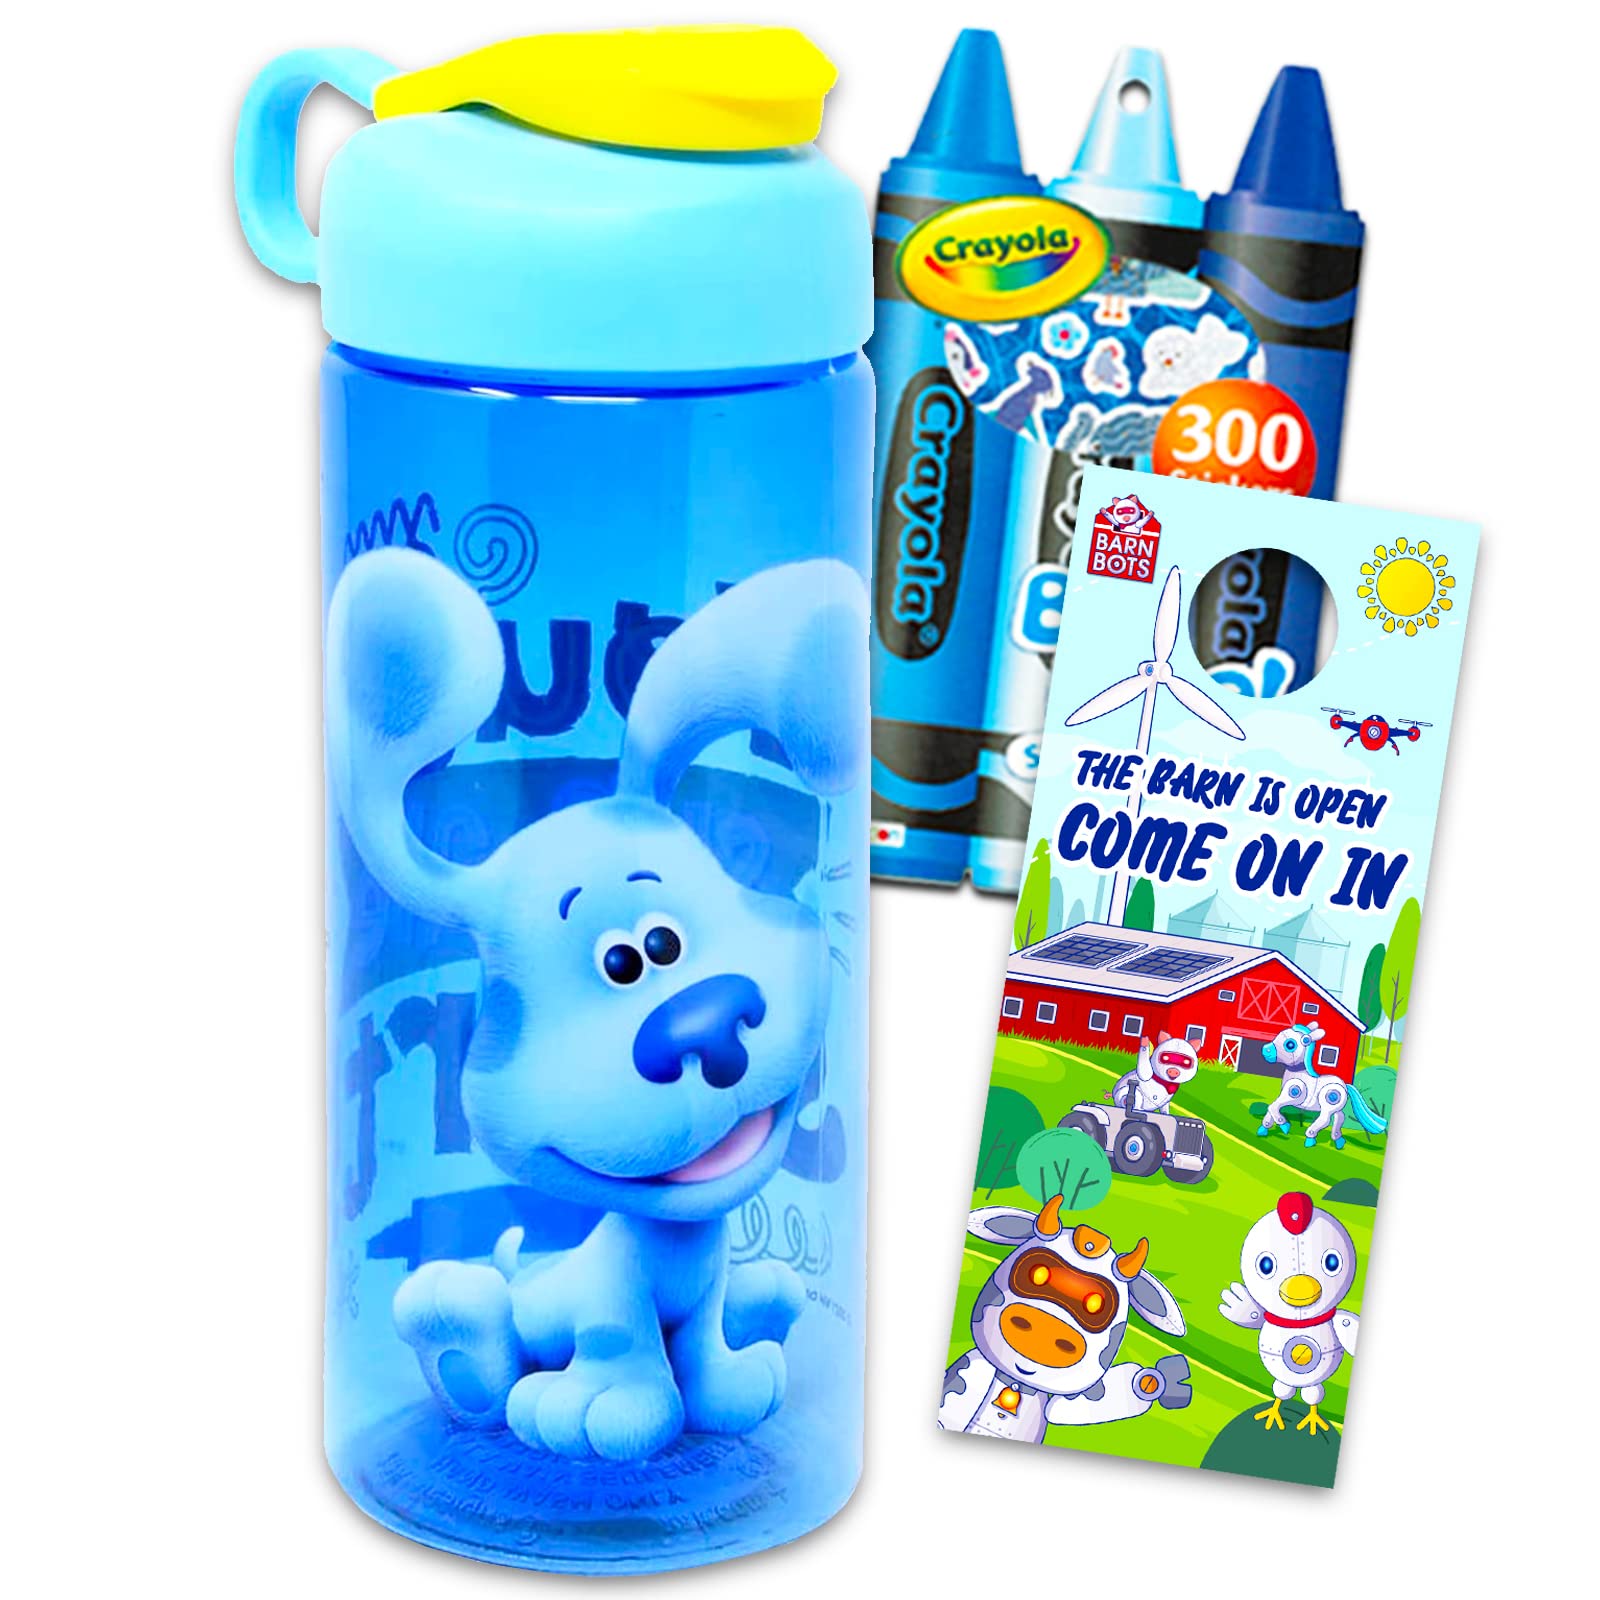 Blues clues plastic water bottle for boys and girls pc bundle with blues clues reusable bottle for home travel school and sports plus stickers coloring pages and more